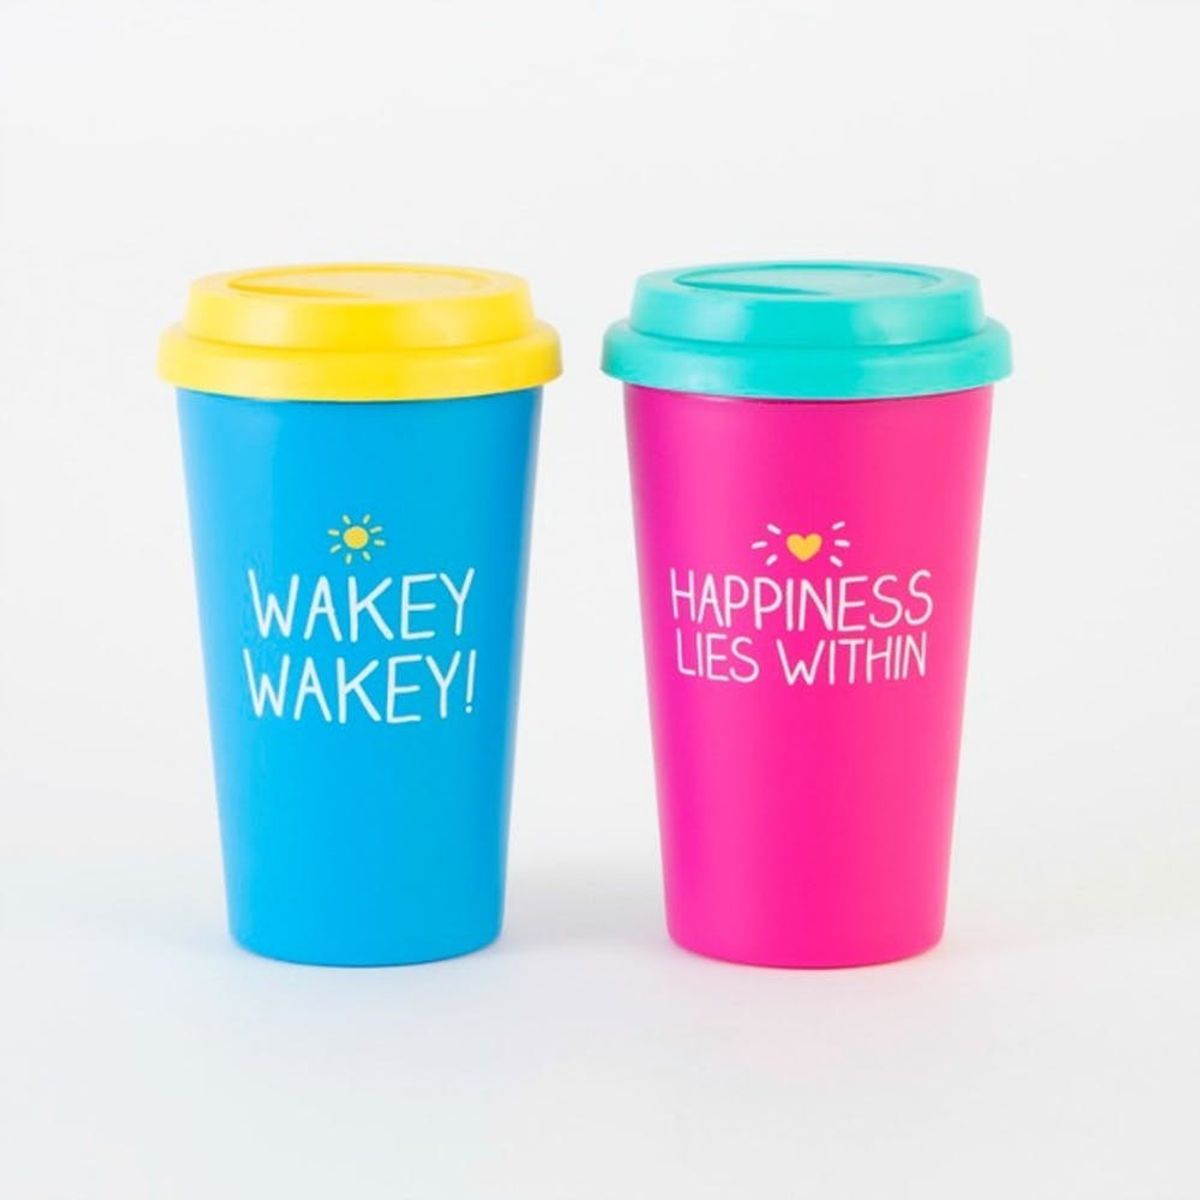 12 Motivational Travel Mugs That Will Make Your Commute More Bearable